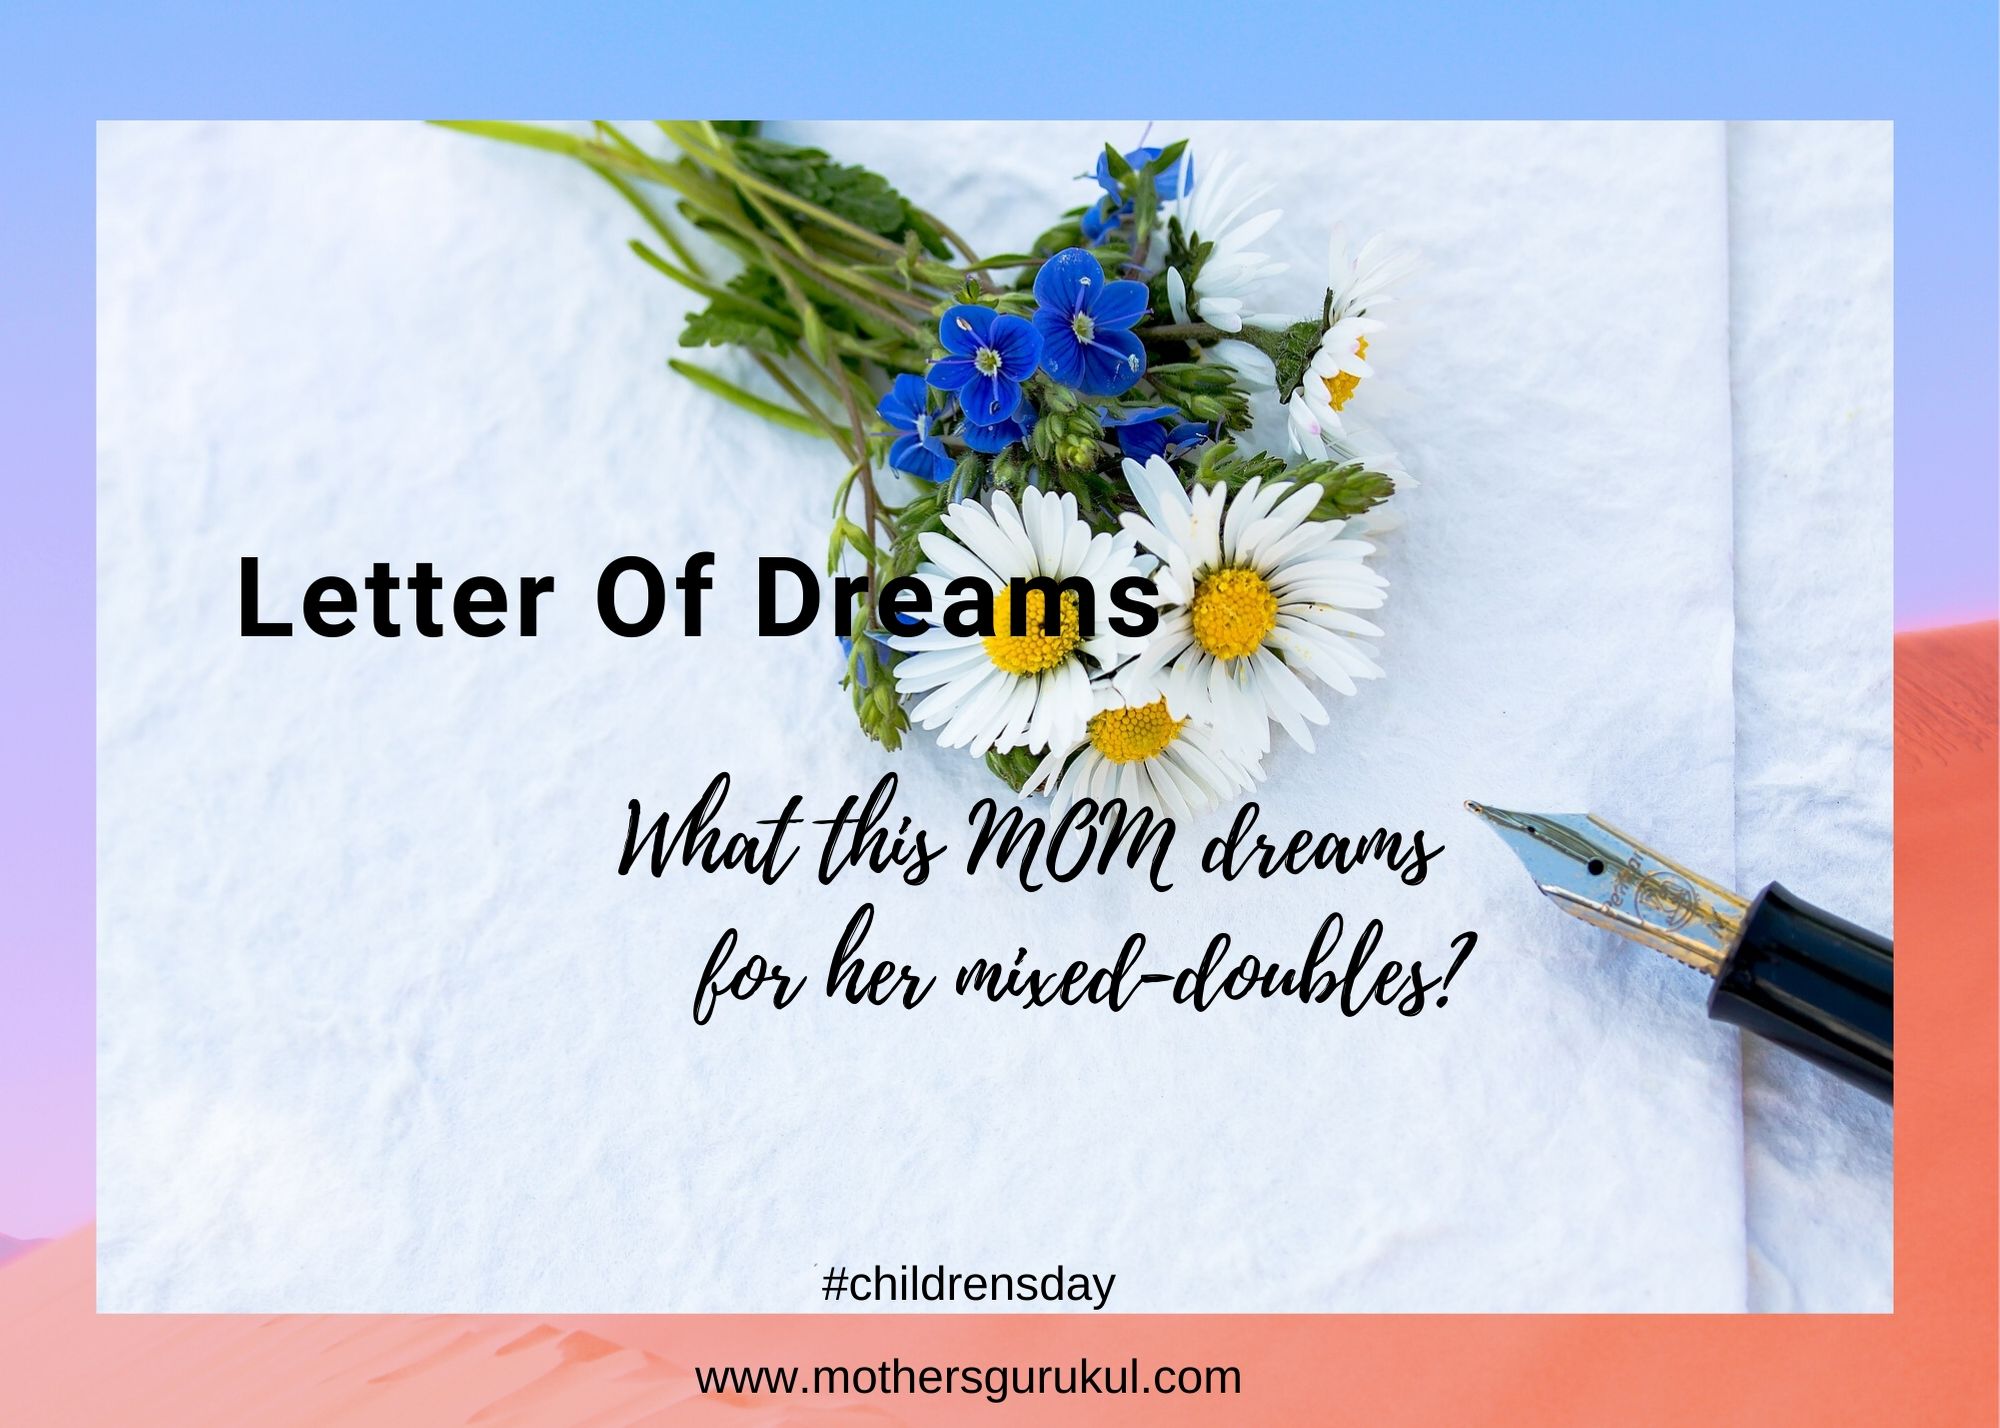 Letter Of Dreams What This Mom Dreams For Her Mixed Doubles